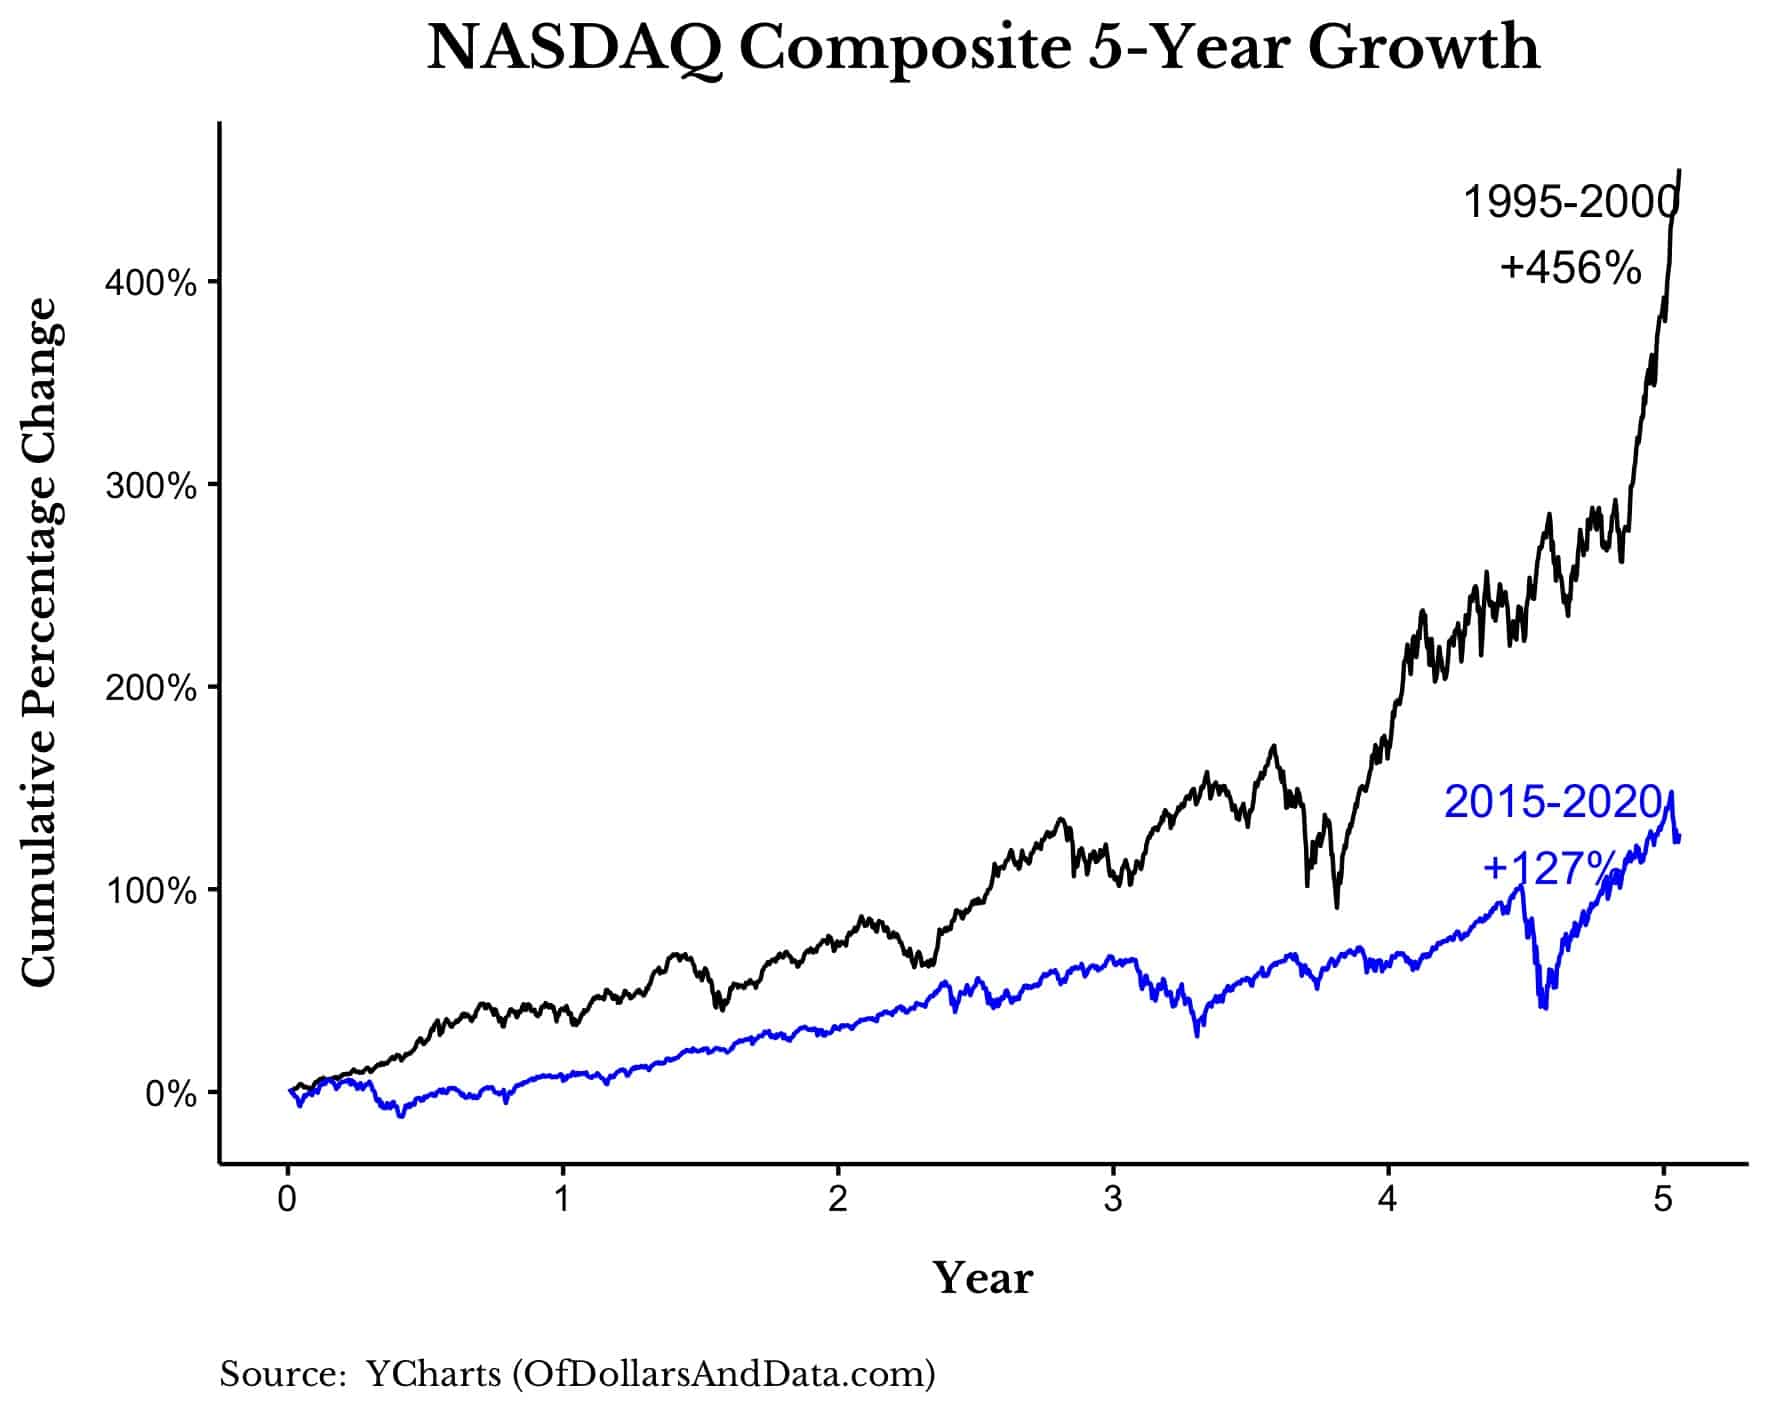 NASDAQ growth from 1995-2000 and 2015-2020